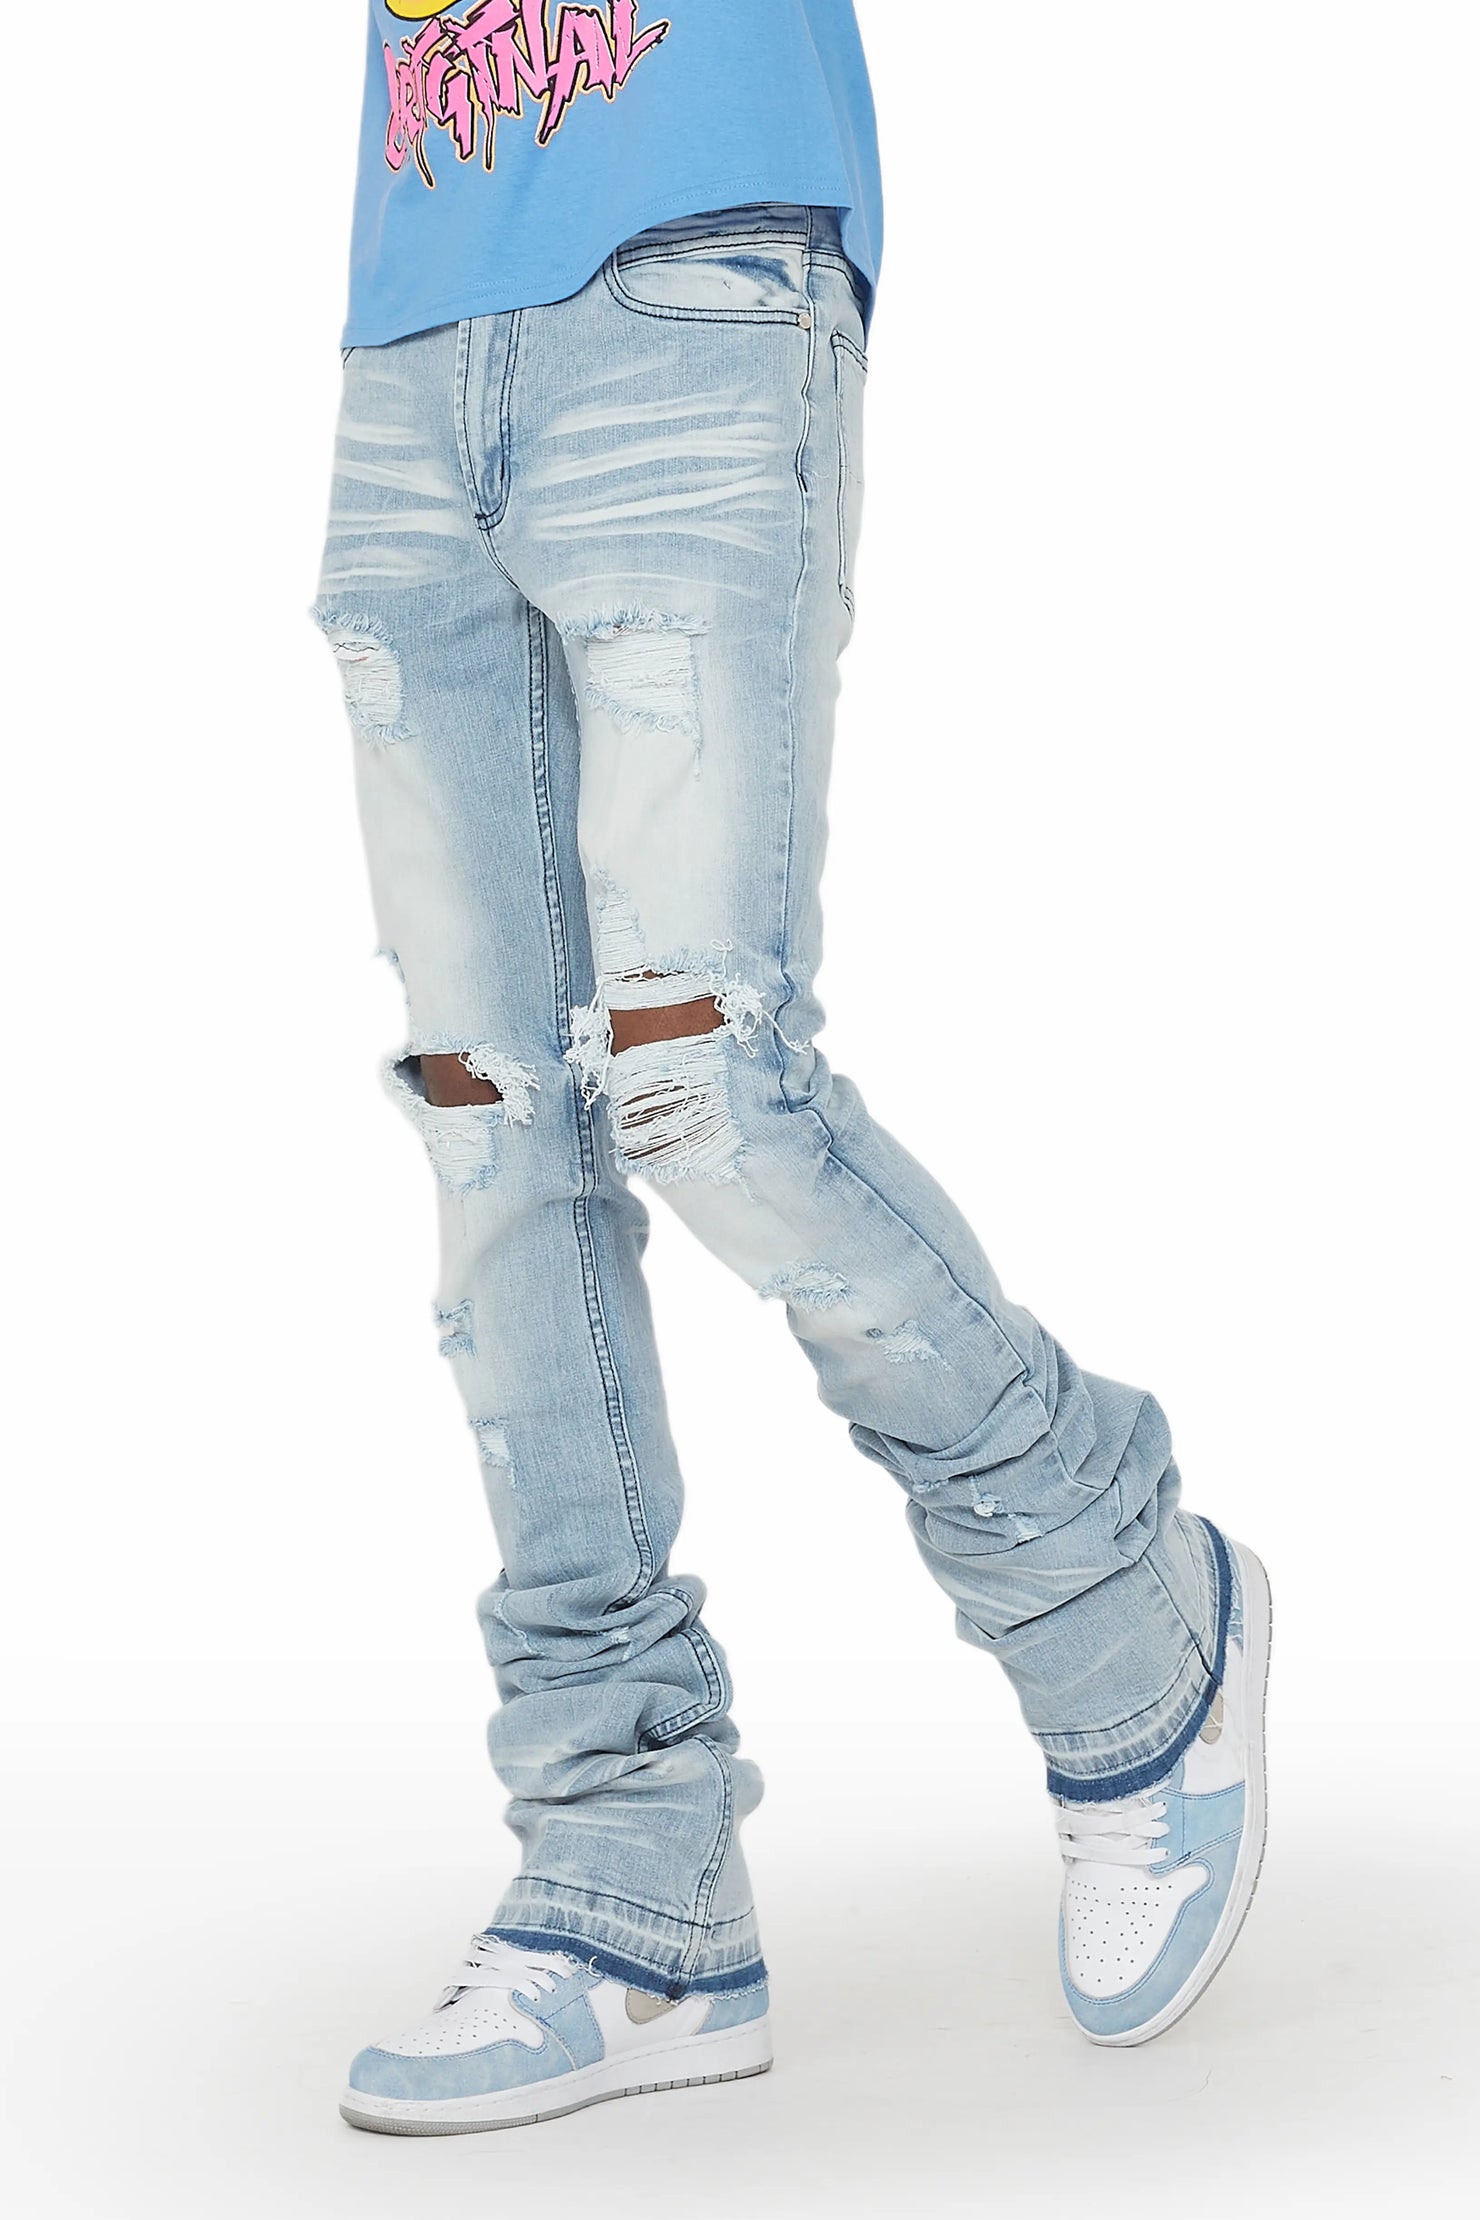 Why Super Stacked Jeans Are the Ultimate Denim Trend – Politics